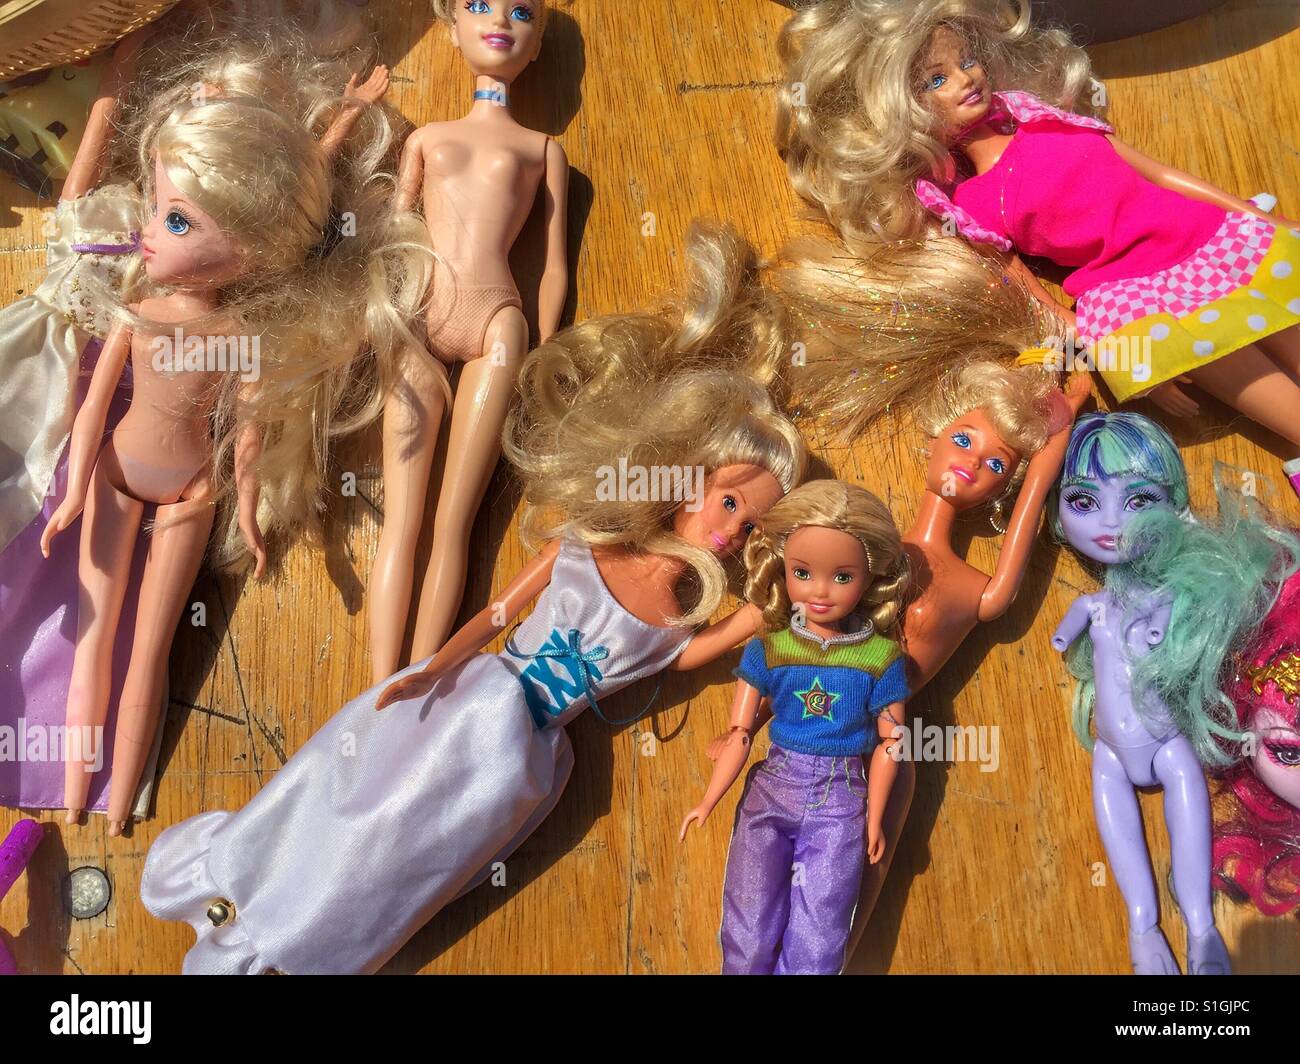 Barbie dolls and various children's toy dolls are seen for sale at a car boot sale in Sussex in England Stock Photo